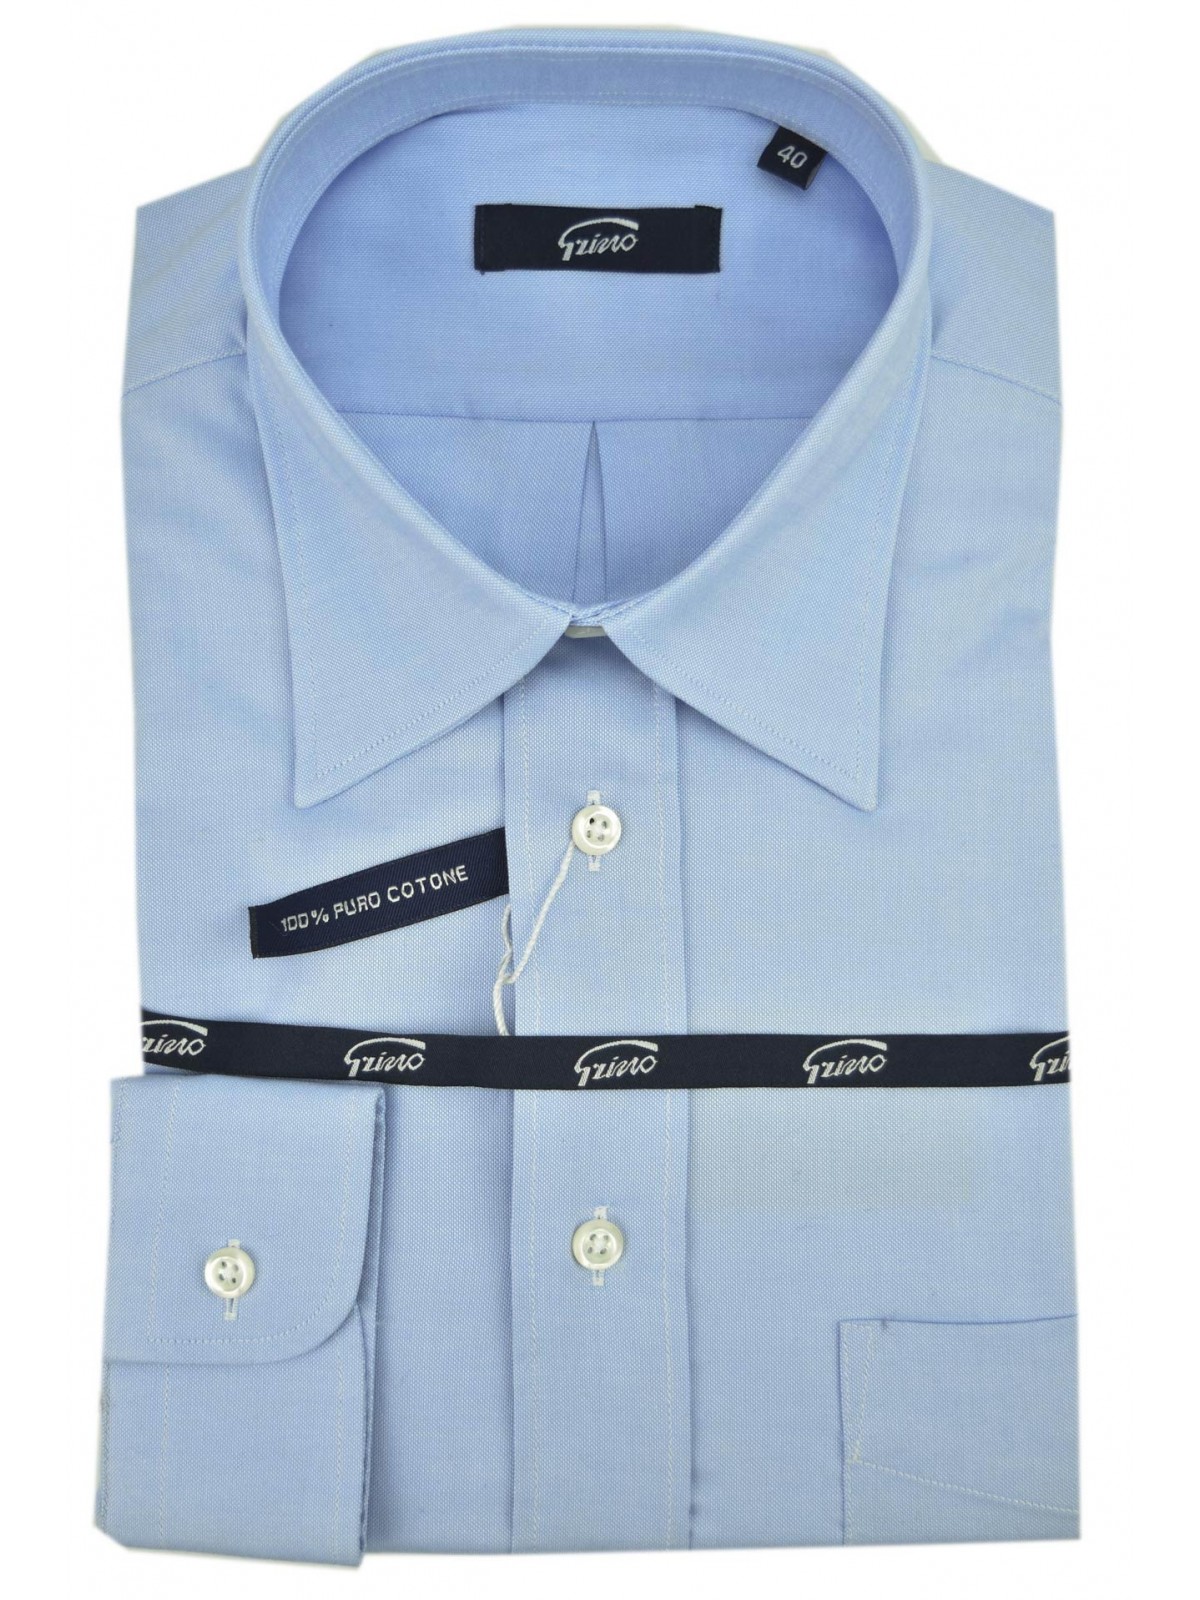 Classic Men's Shirt with Italy Collar Oxford Light Blue -